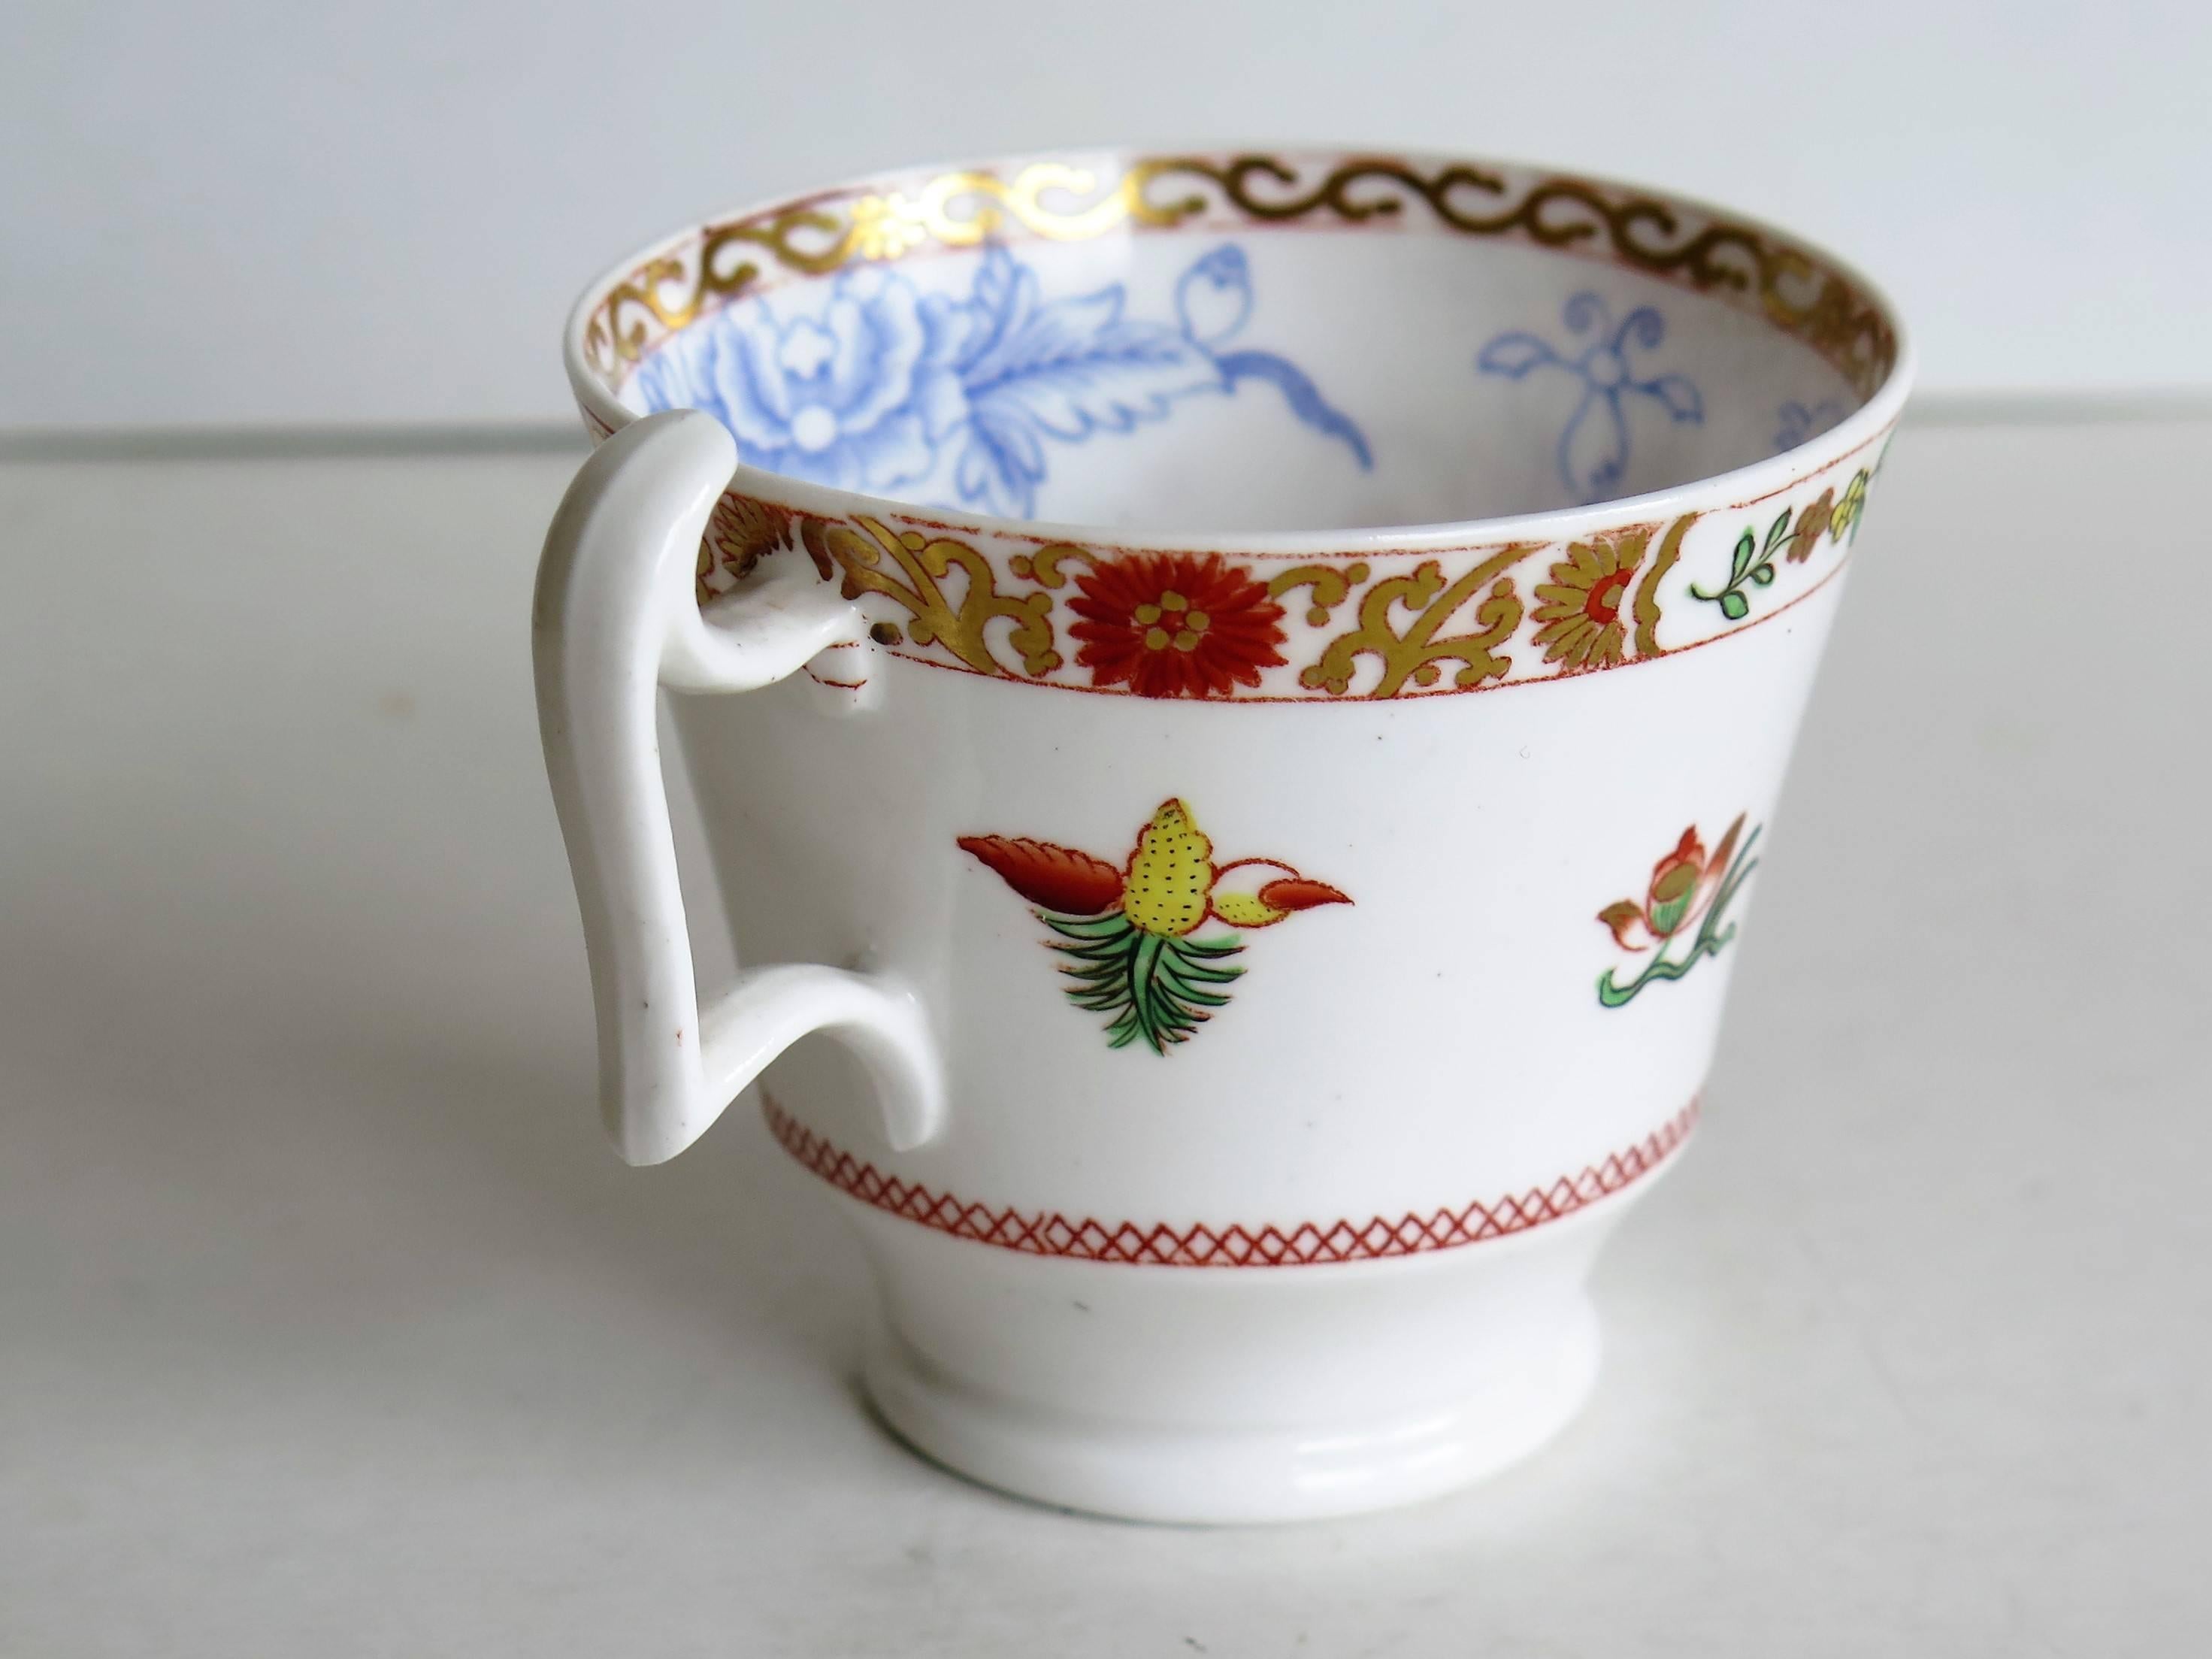 Early 19th C Spode Cup and Saucer Porcelain Chinoiserie Pattern 2638, Circa 1815 5